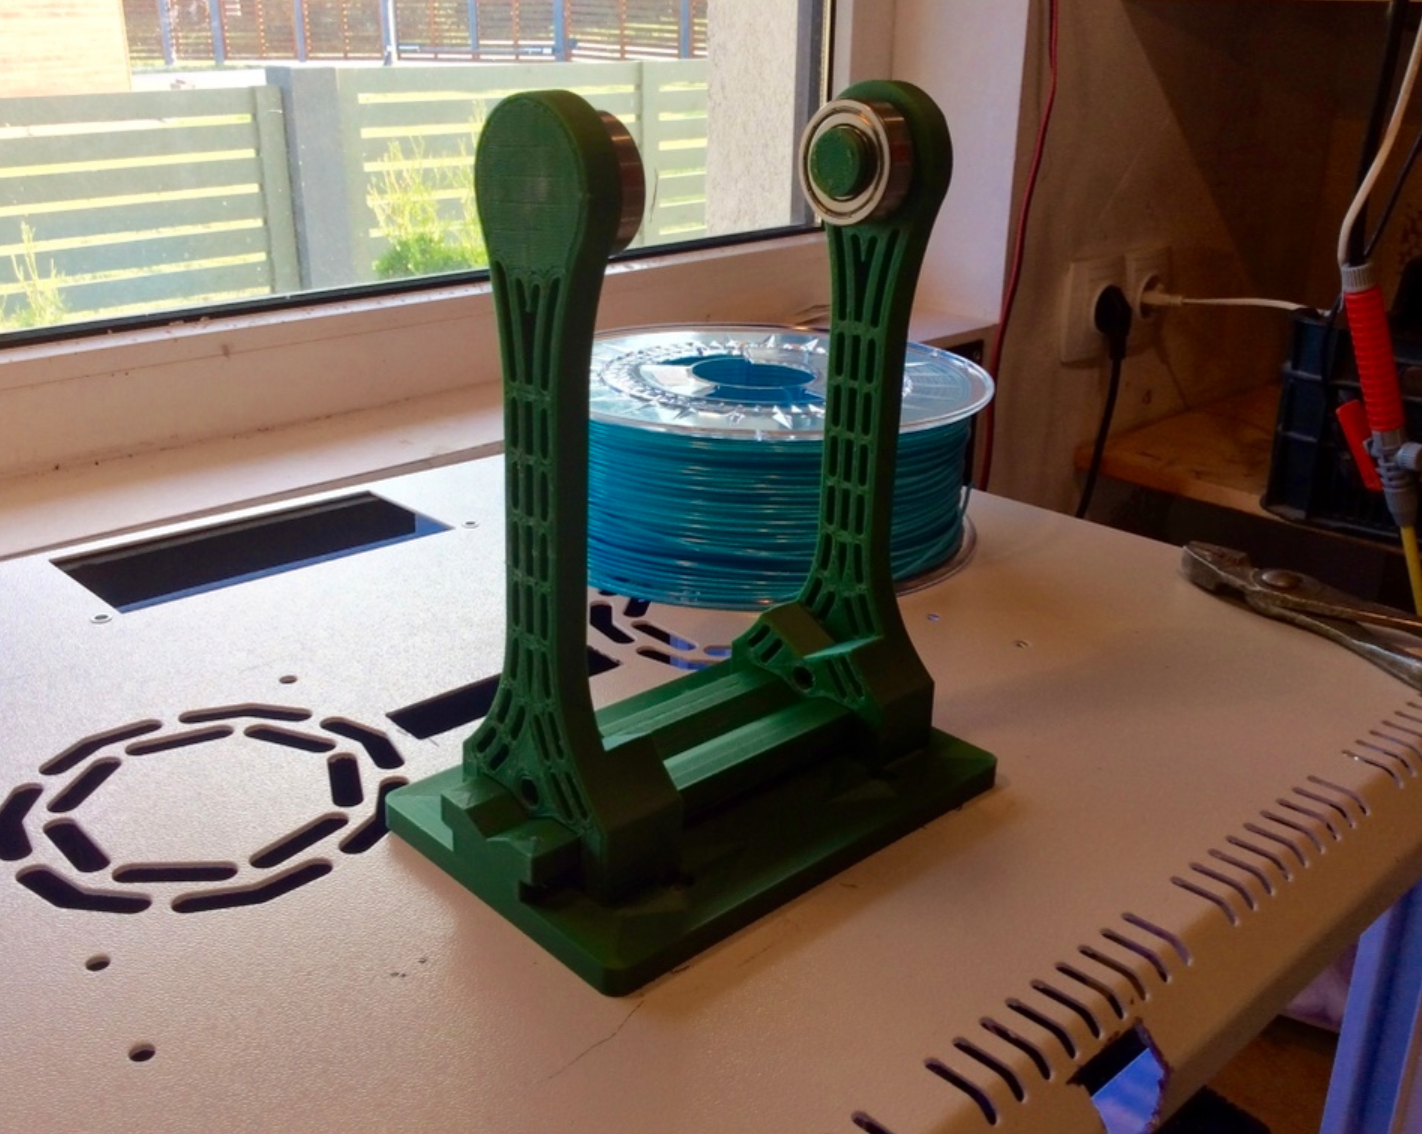 Capture d’écran 2017-10-19 à 15.52.17.png Download free STL file Art Deco style spool holder with bearings • 3D printing object, Opossums